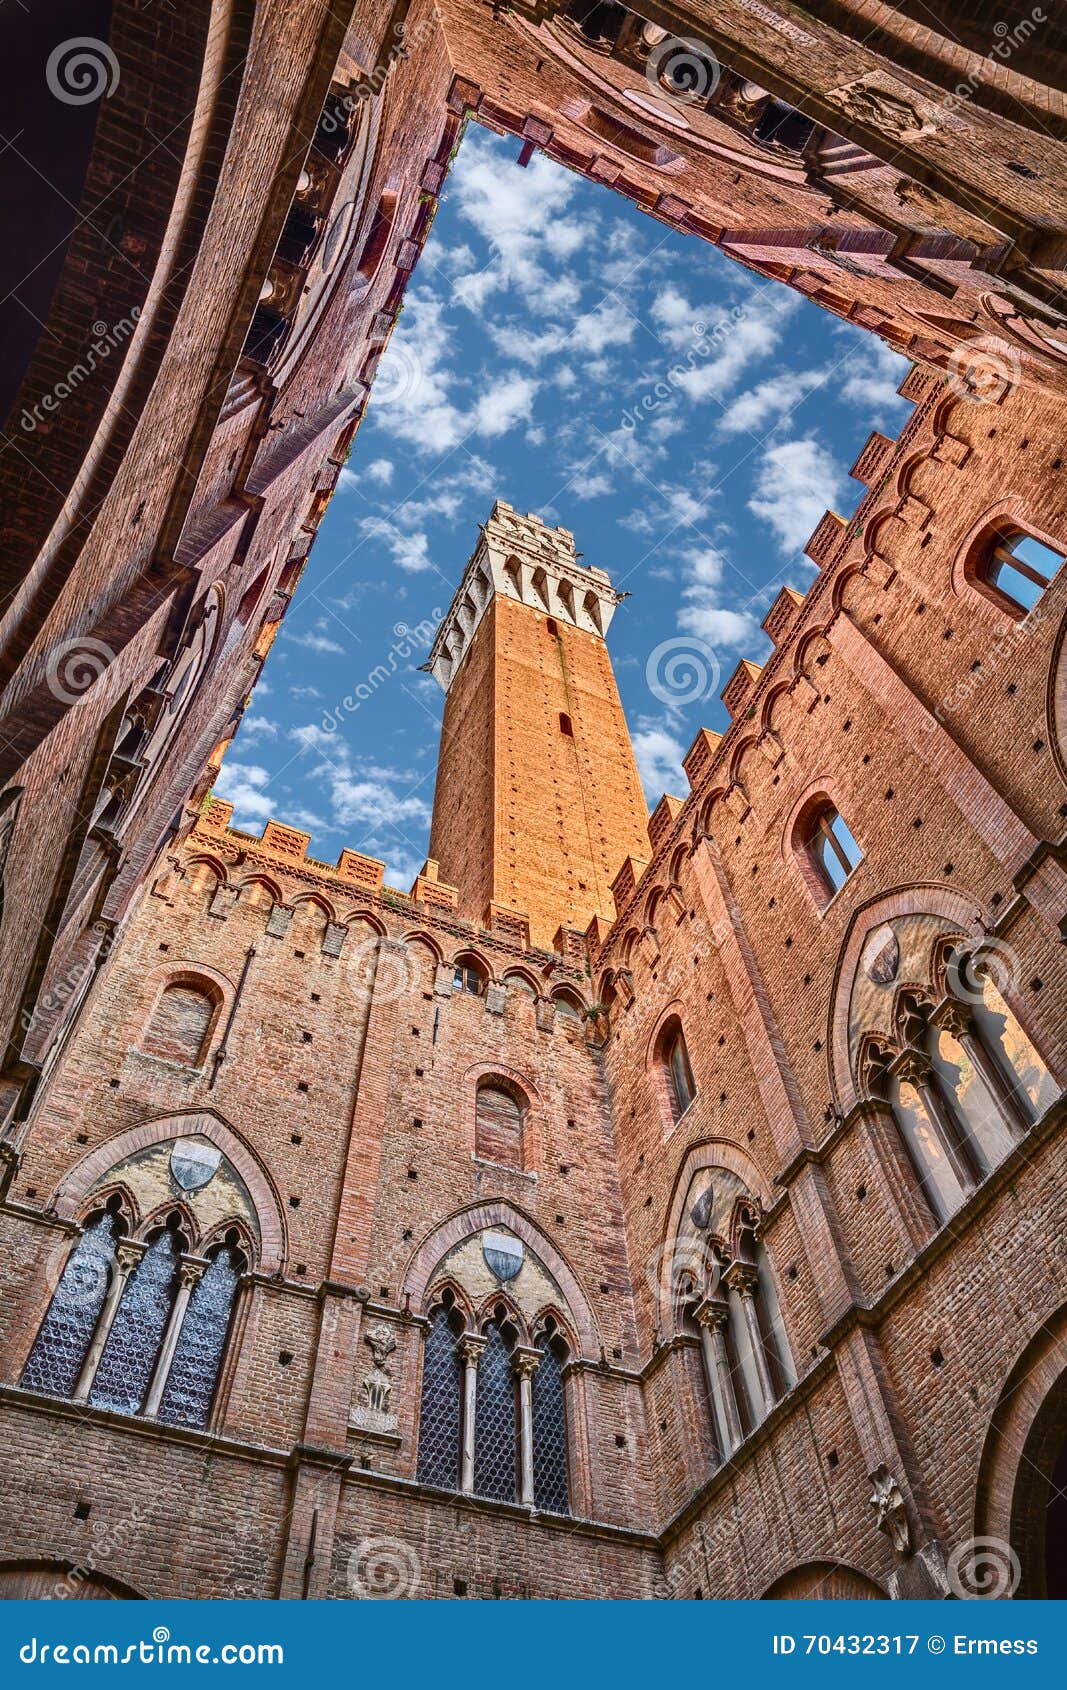 torre del mangia view from the palazzo pubblico in siena, tuscan